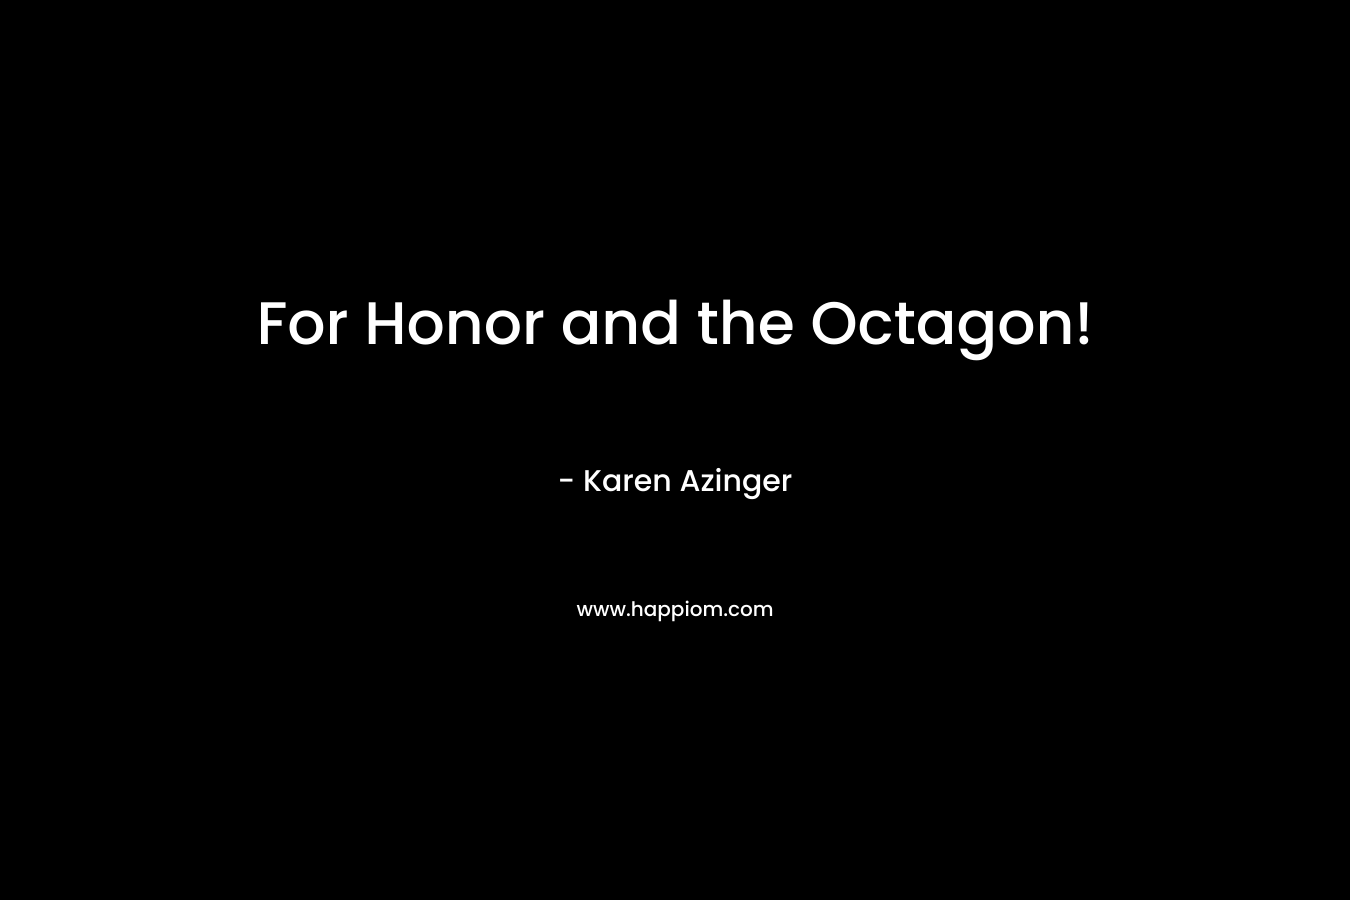 For Honor and the Octagon! – Karen Azinger